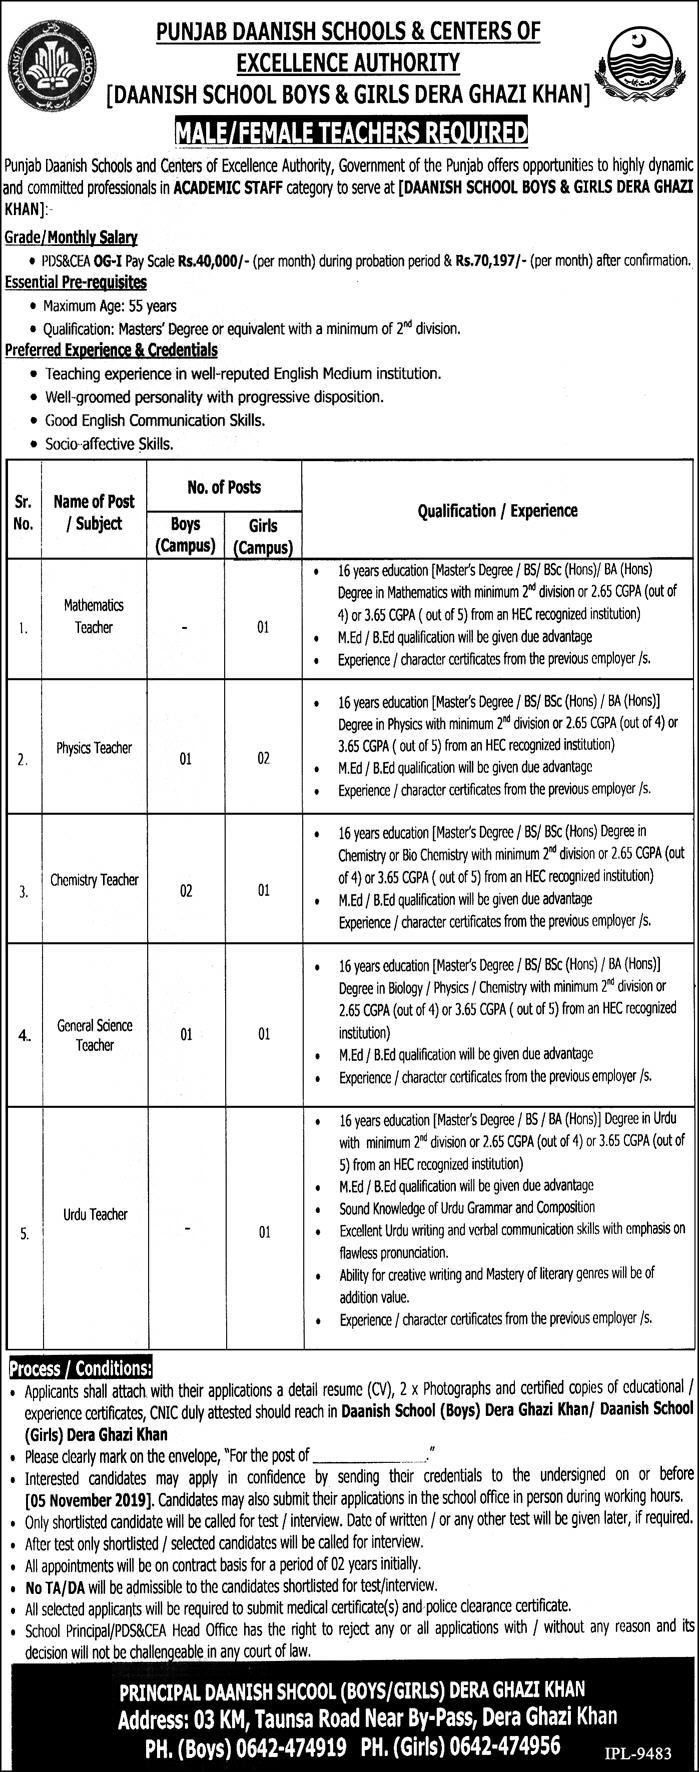 Jobs In Punjab Daanish Schools And Centers Of Excellence Authority 17 October 2019